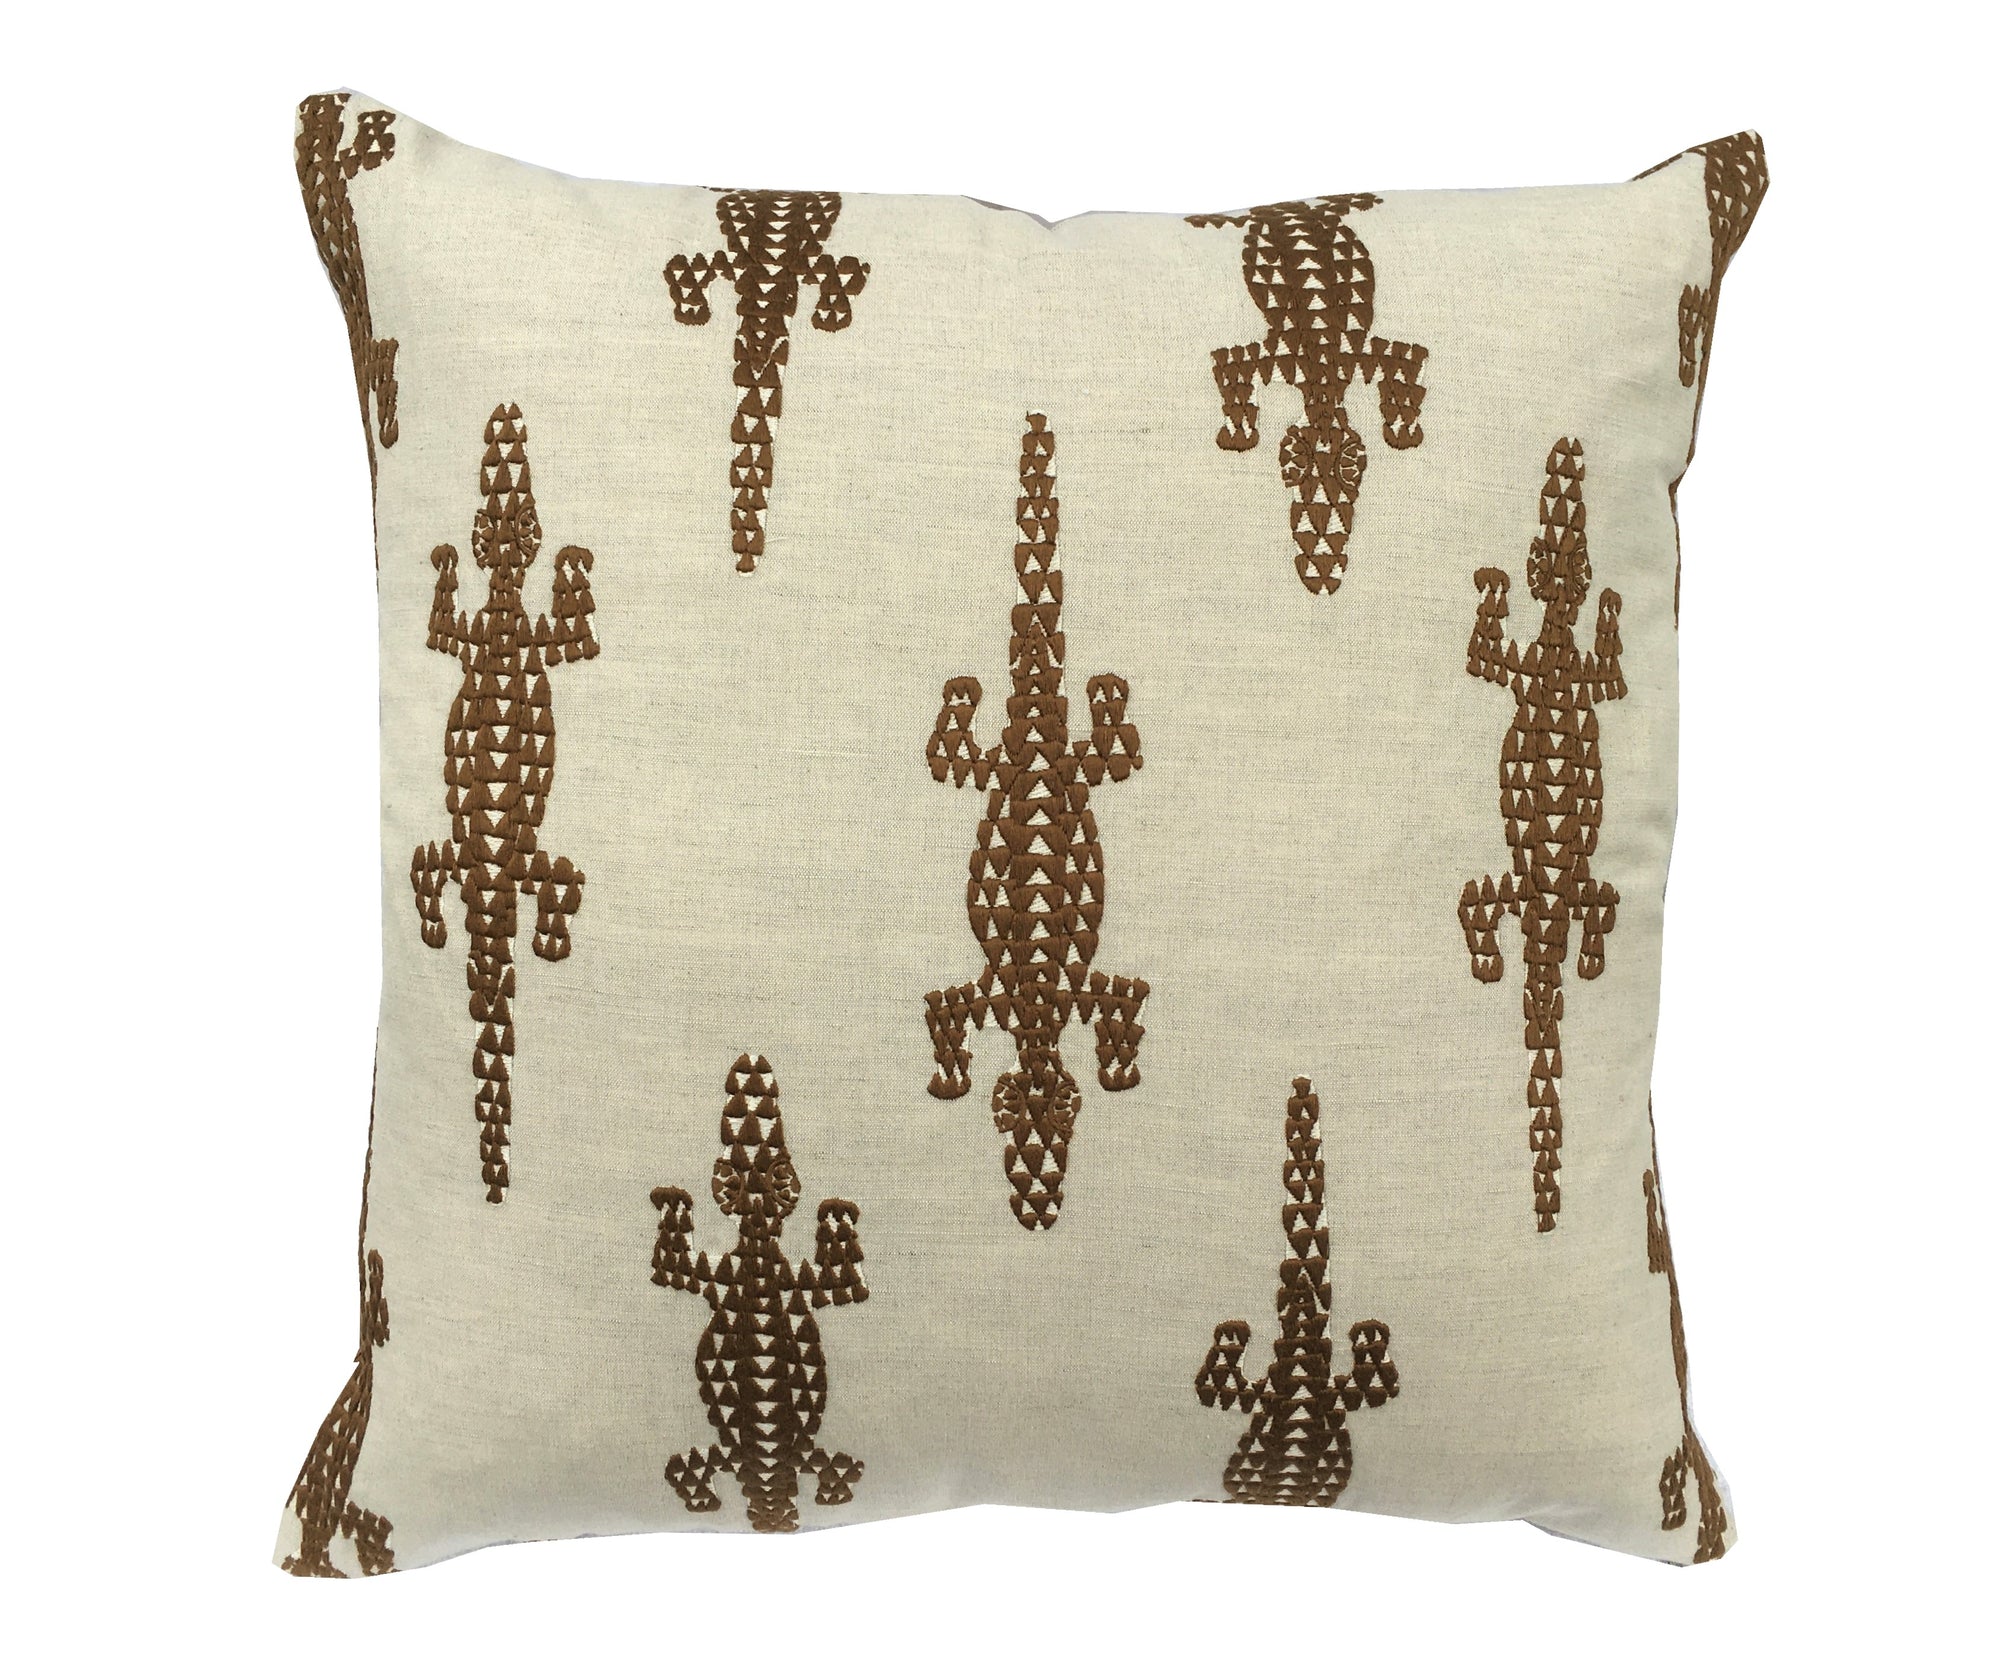 Baracoa Brown Embroidery Pillow Cover |